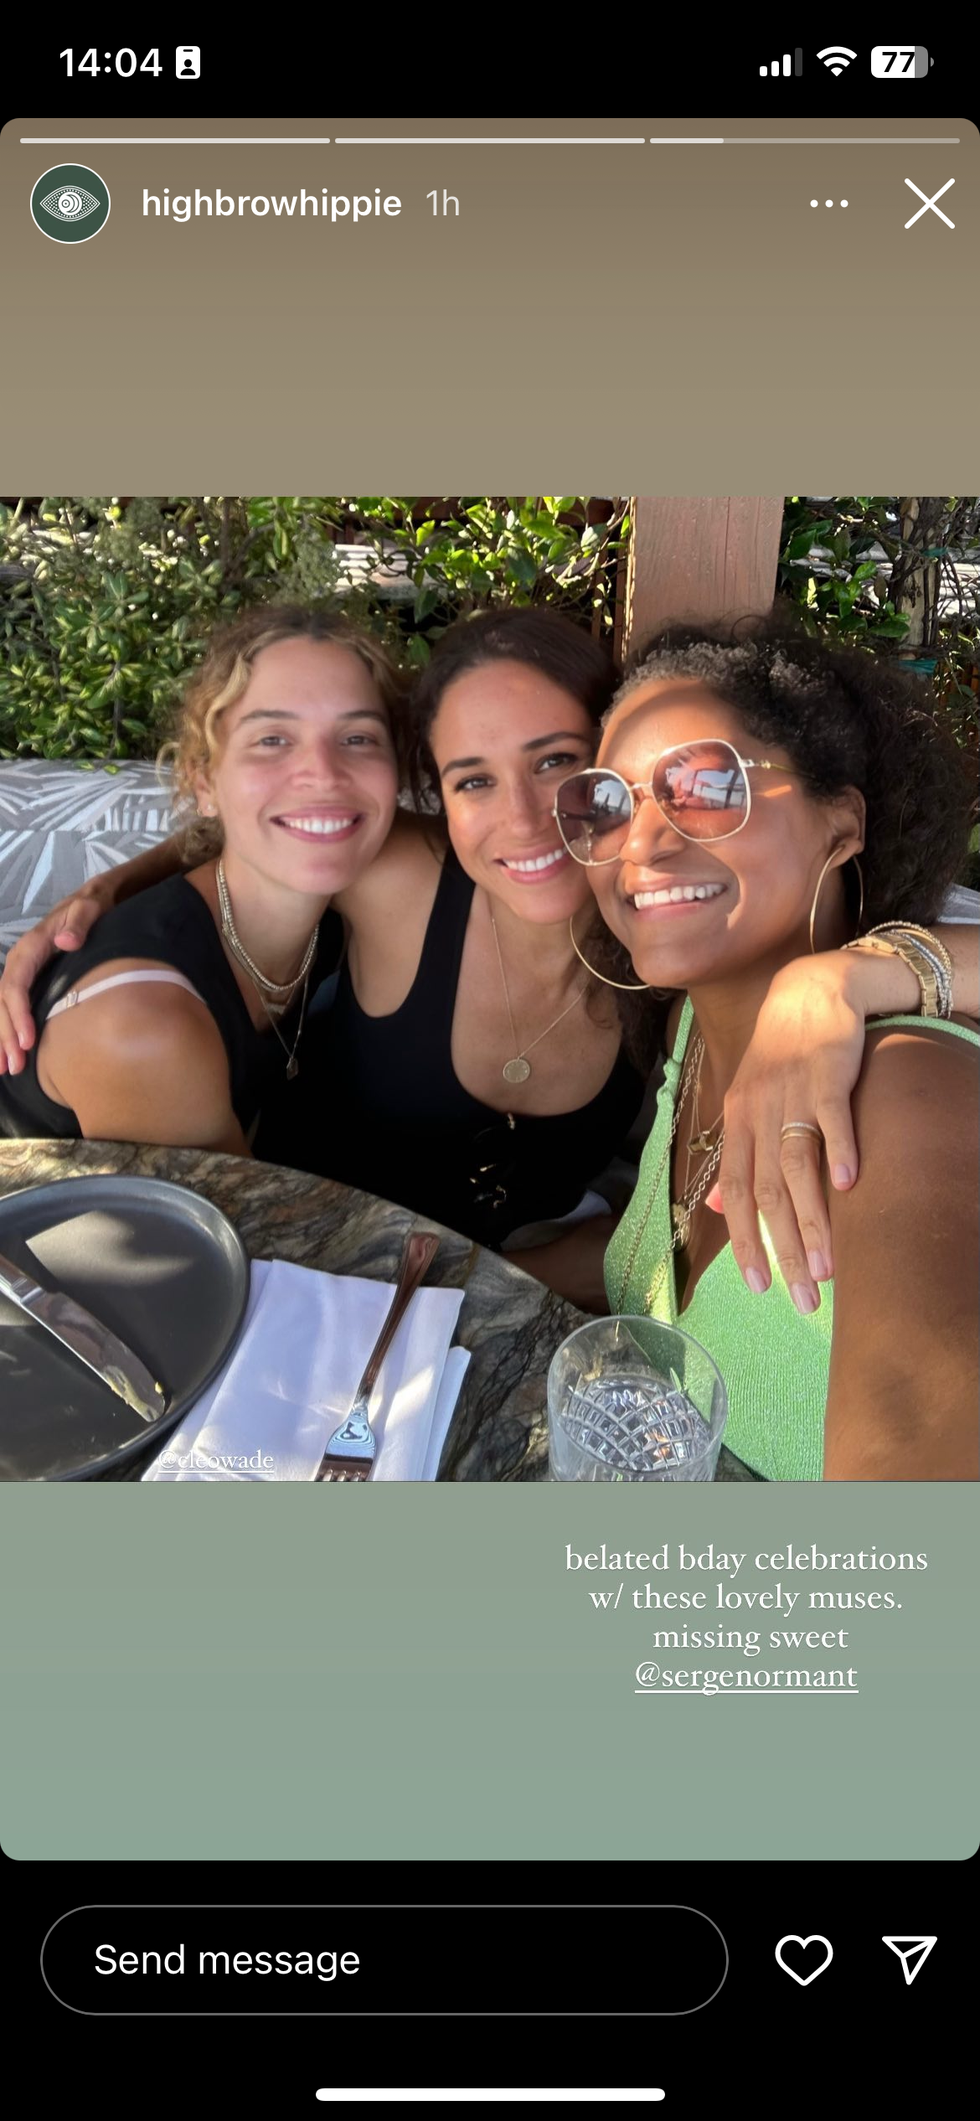 meghan markle with her friends